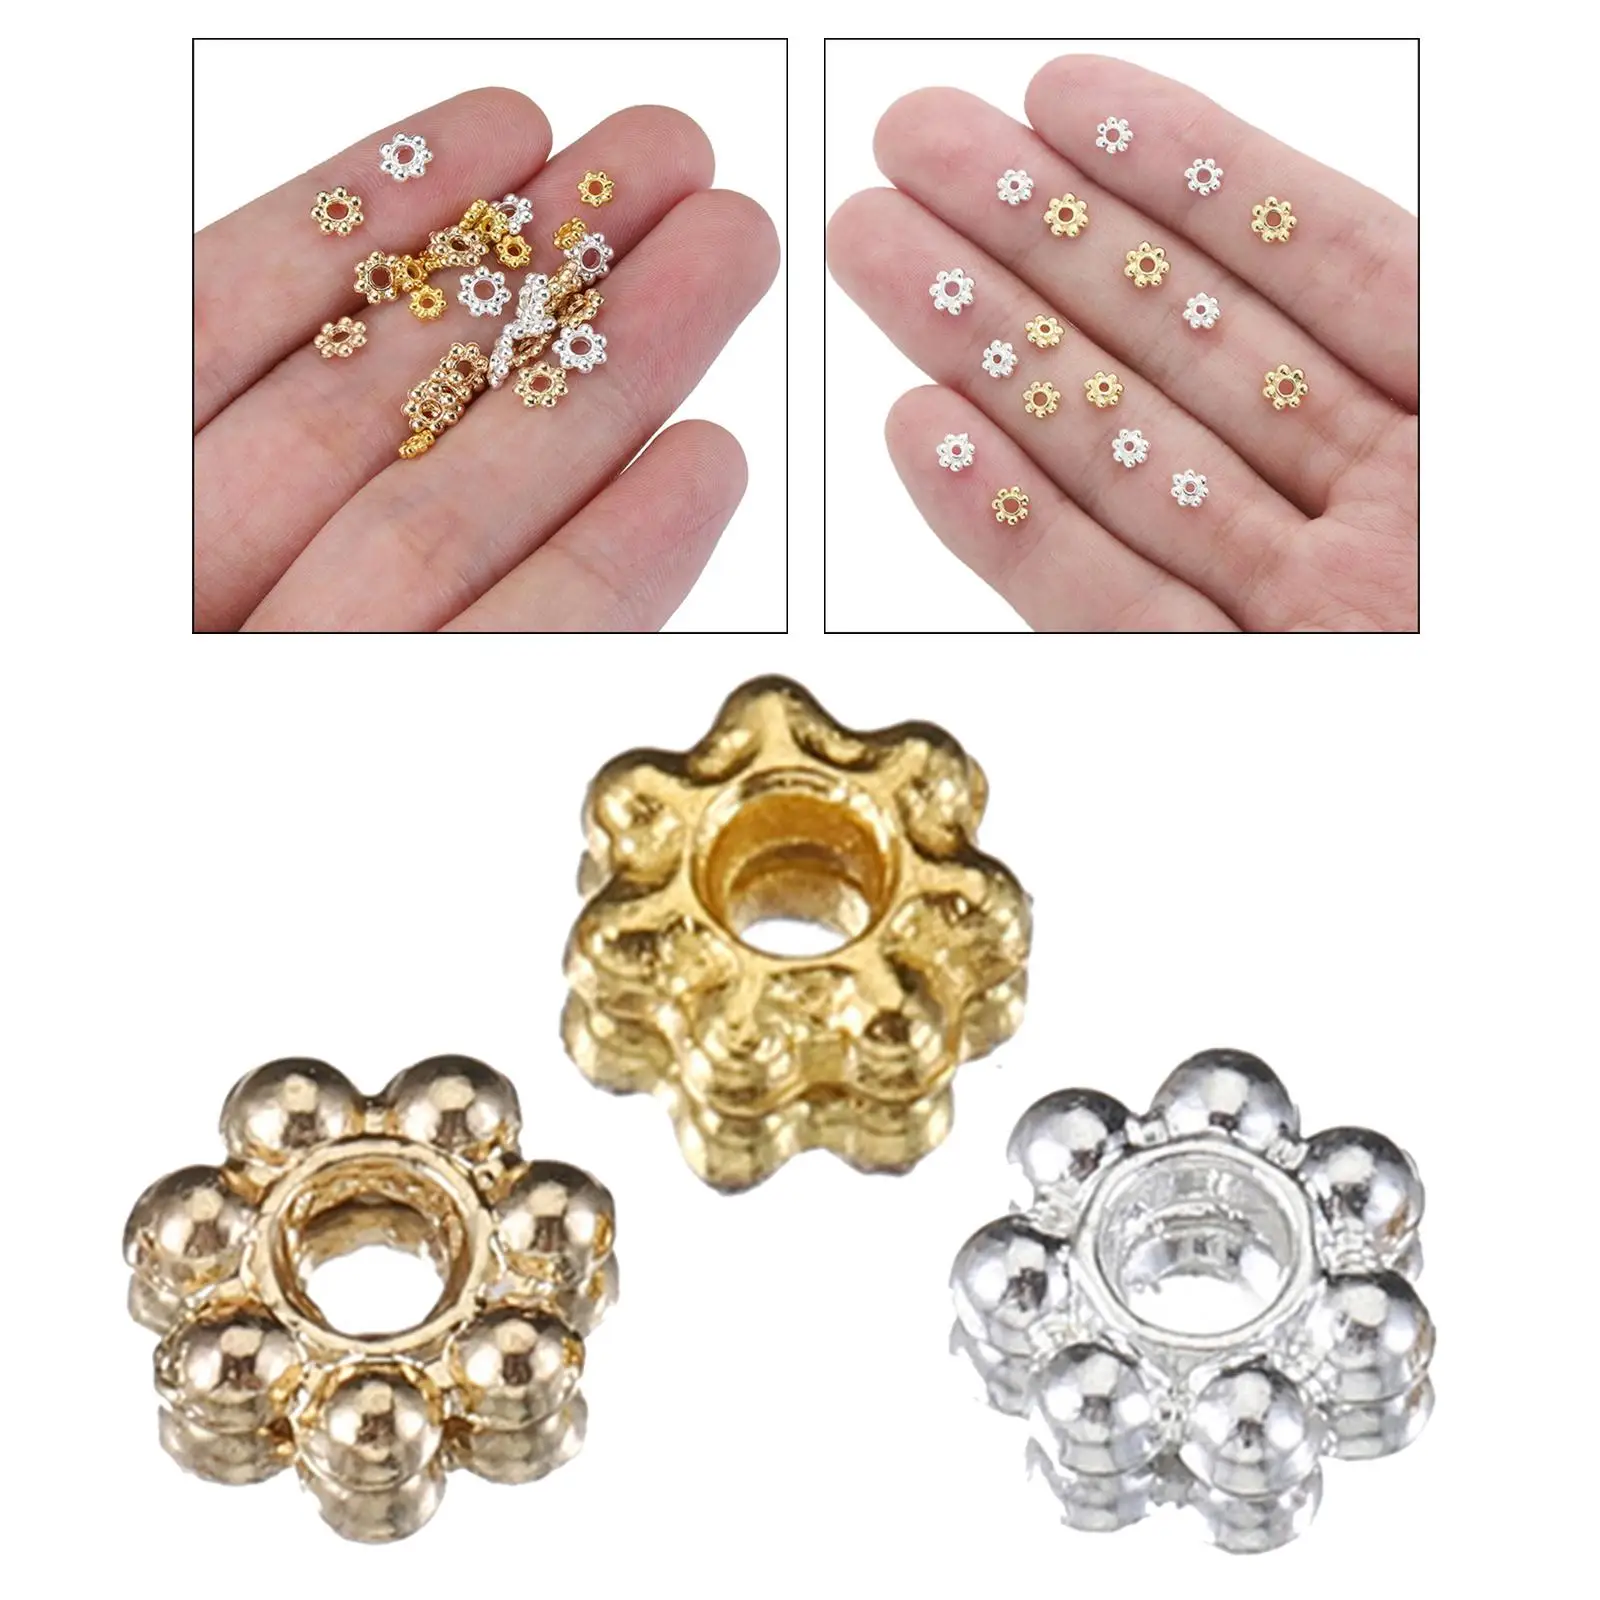 200Pcs Daisy Spacer Beads Set DIY Decor Flower Beads Floral Loose Beads for Jewelry Making Bracelet Rings Earring Pendants